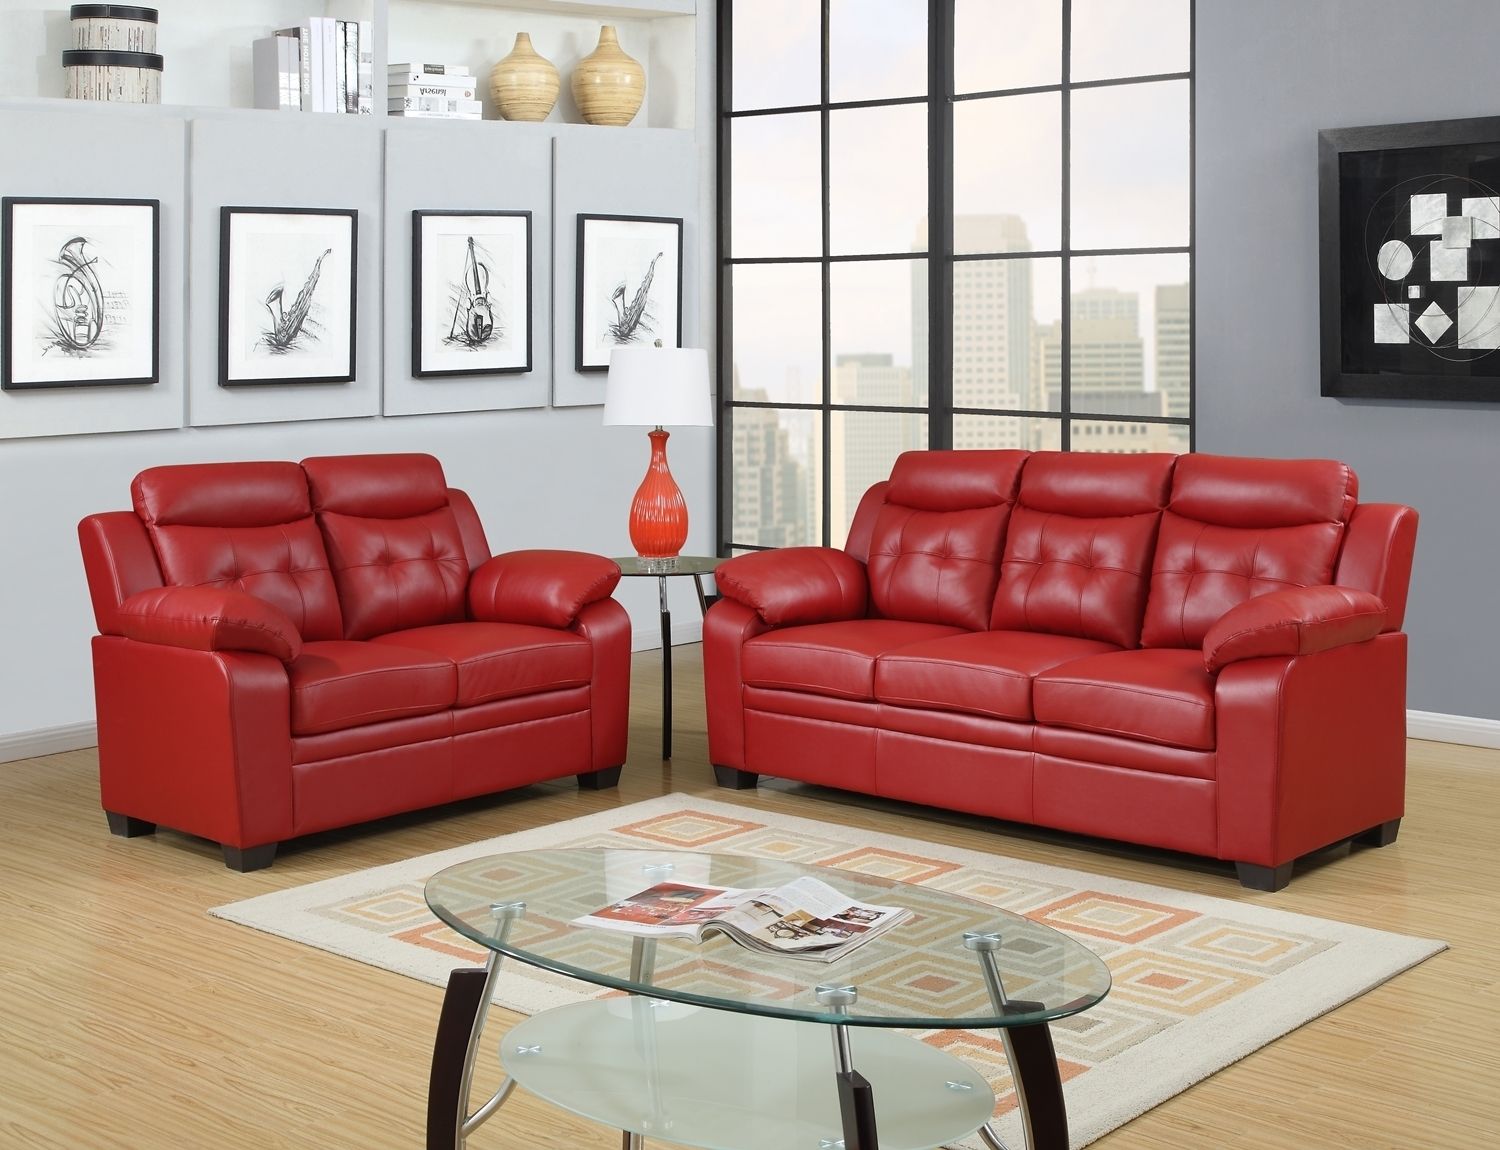 Cheap Red Leather Sofa – Radiovannes Within Red Leather Sofas (View 8 of 15)